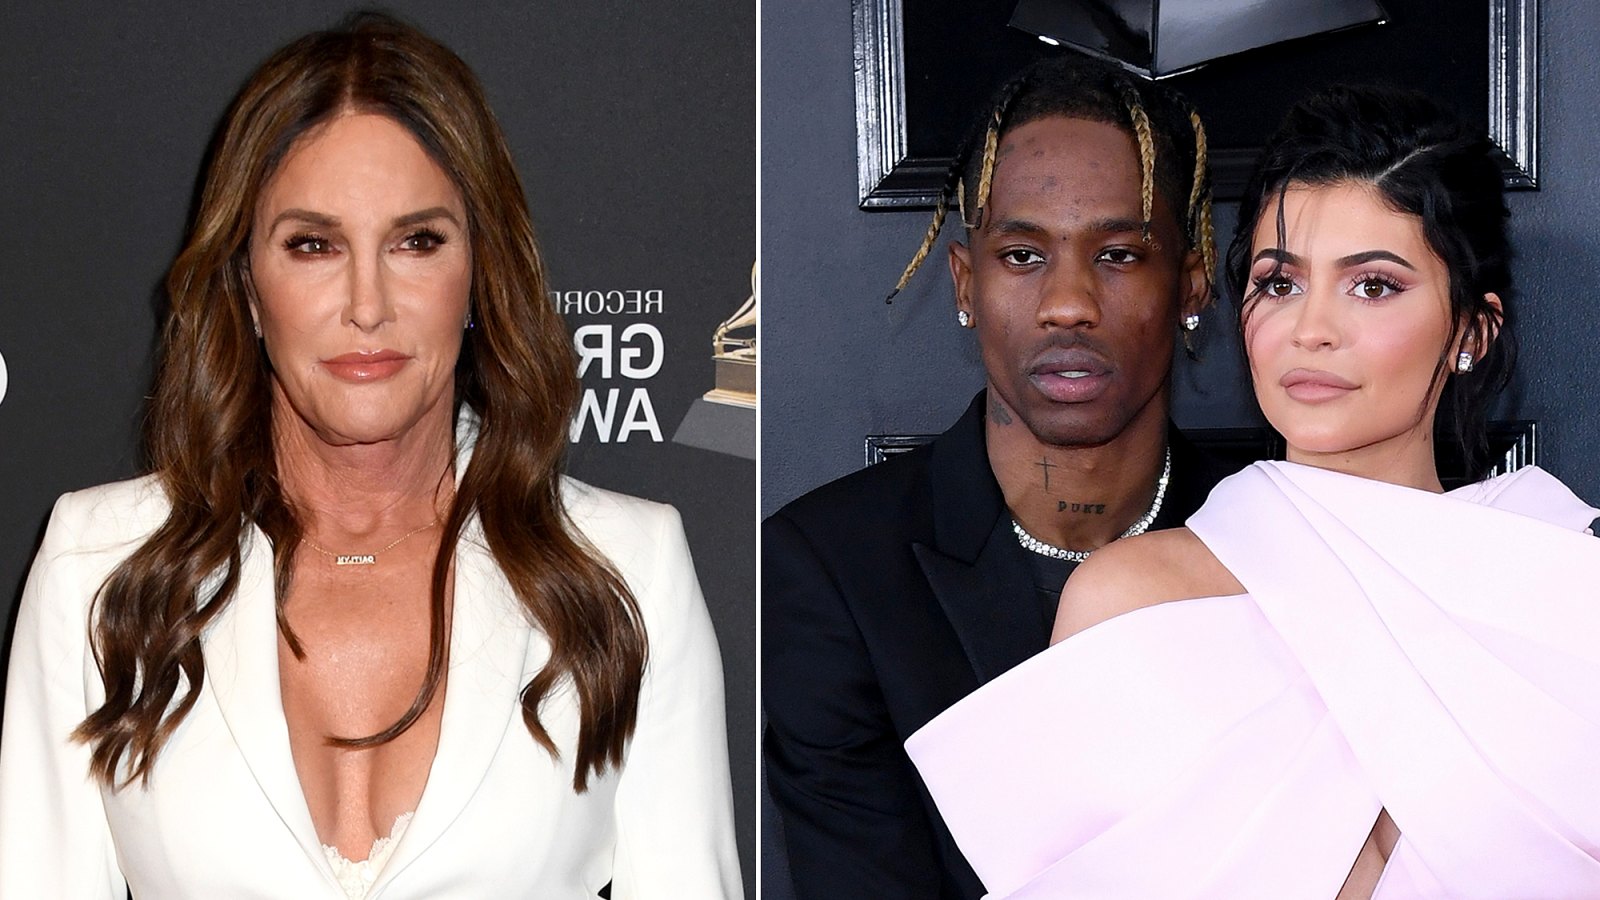 Caitlyn Jenner Shows ‘Love and Support’ for Kylie, Travis Scott During Grammys